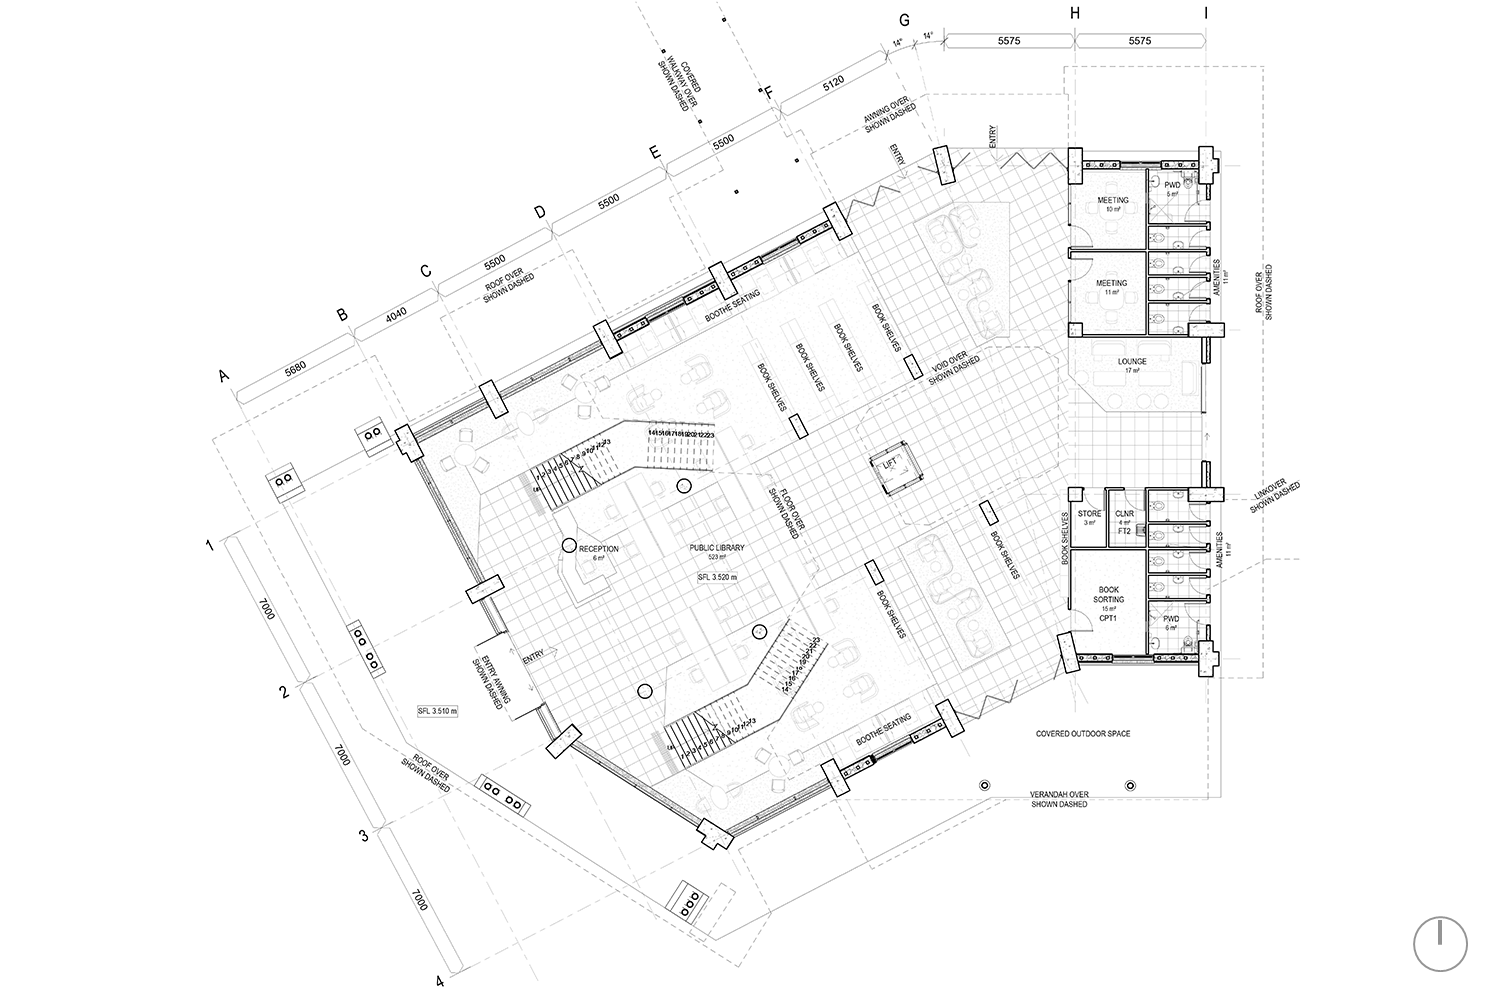 PUBLIC LIBRARY: GROUND LEVEL - PLAN